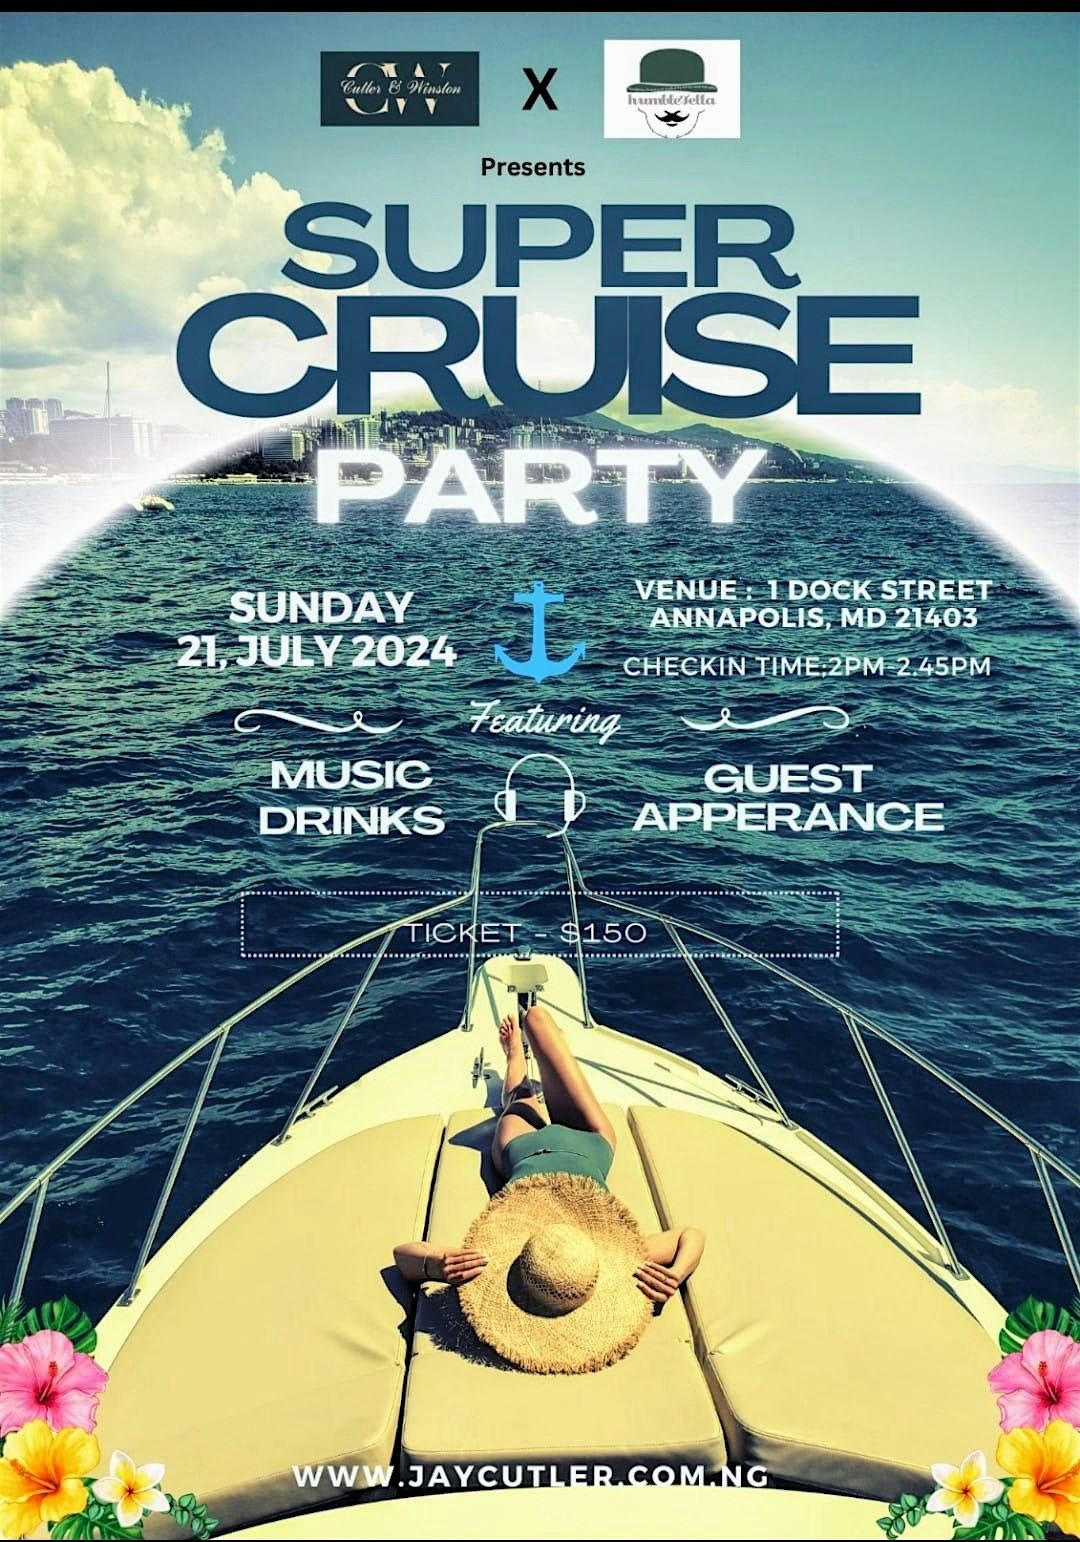 Humblefella and Jay Cutler Super Cruise Party